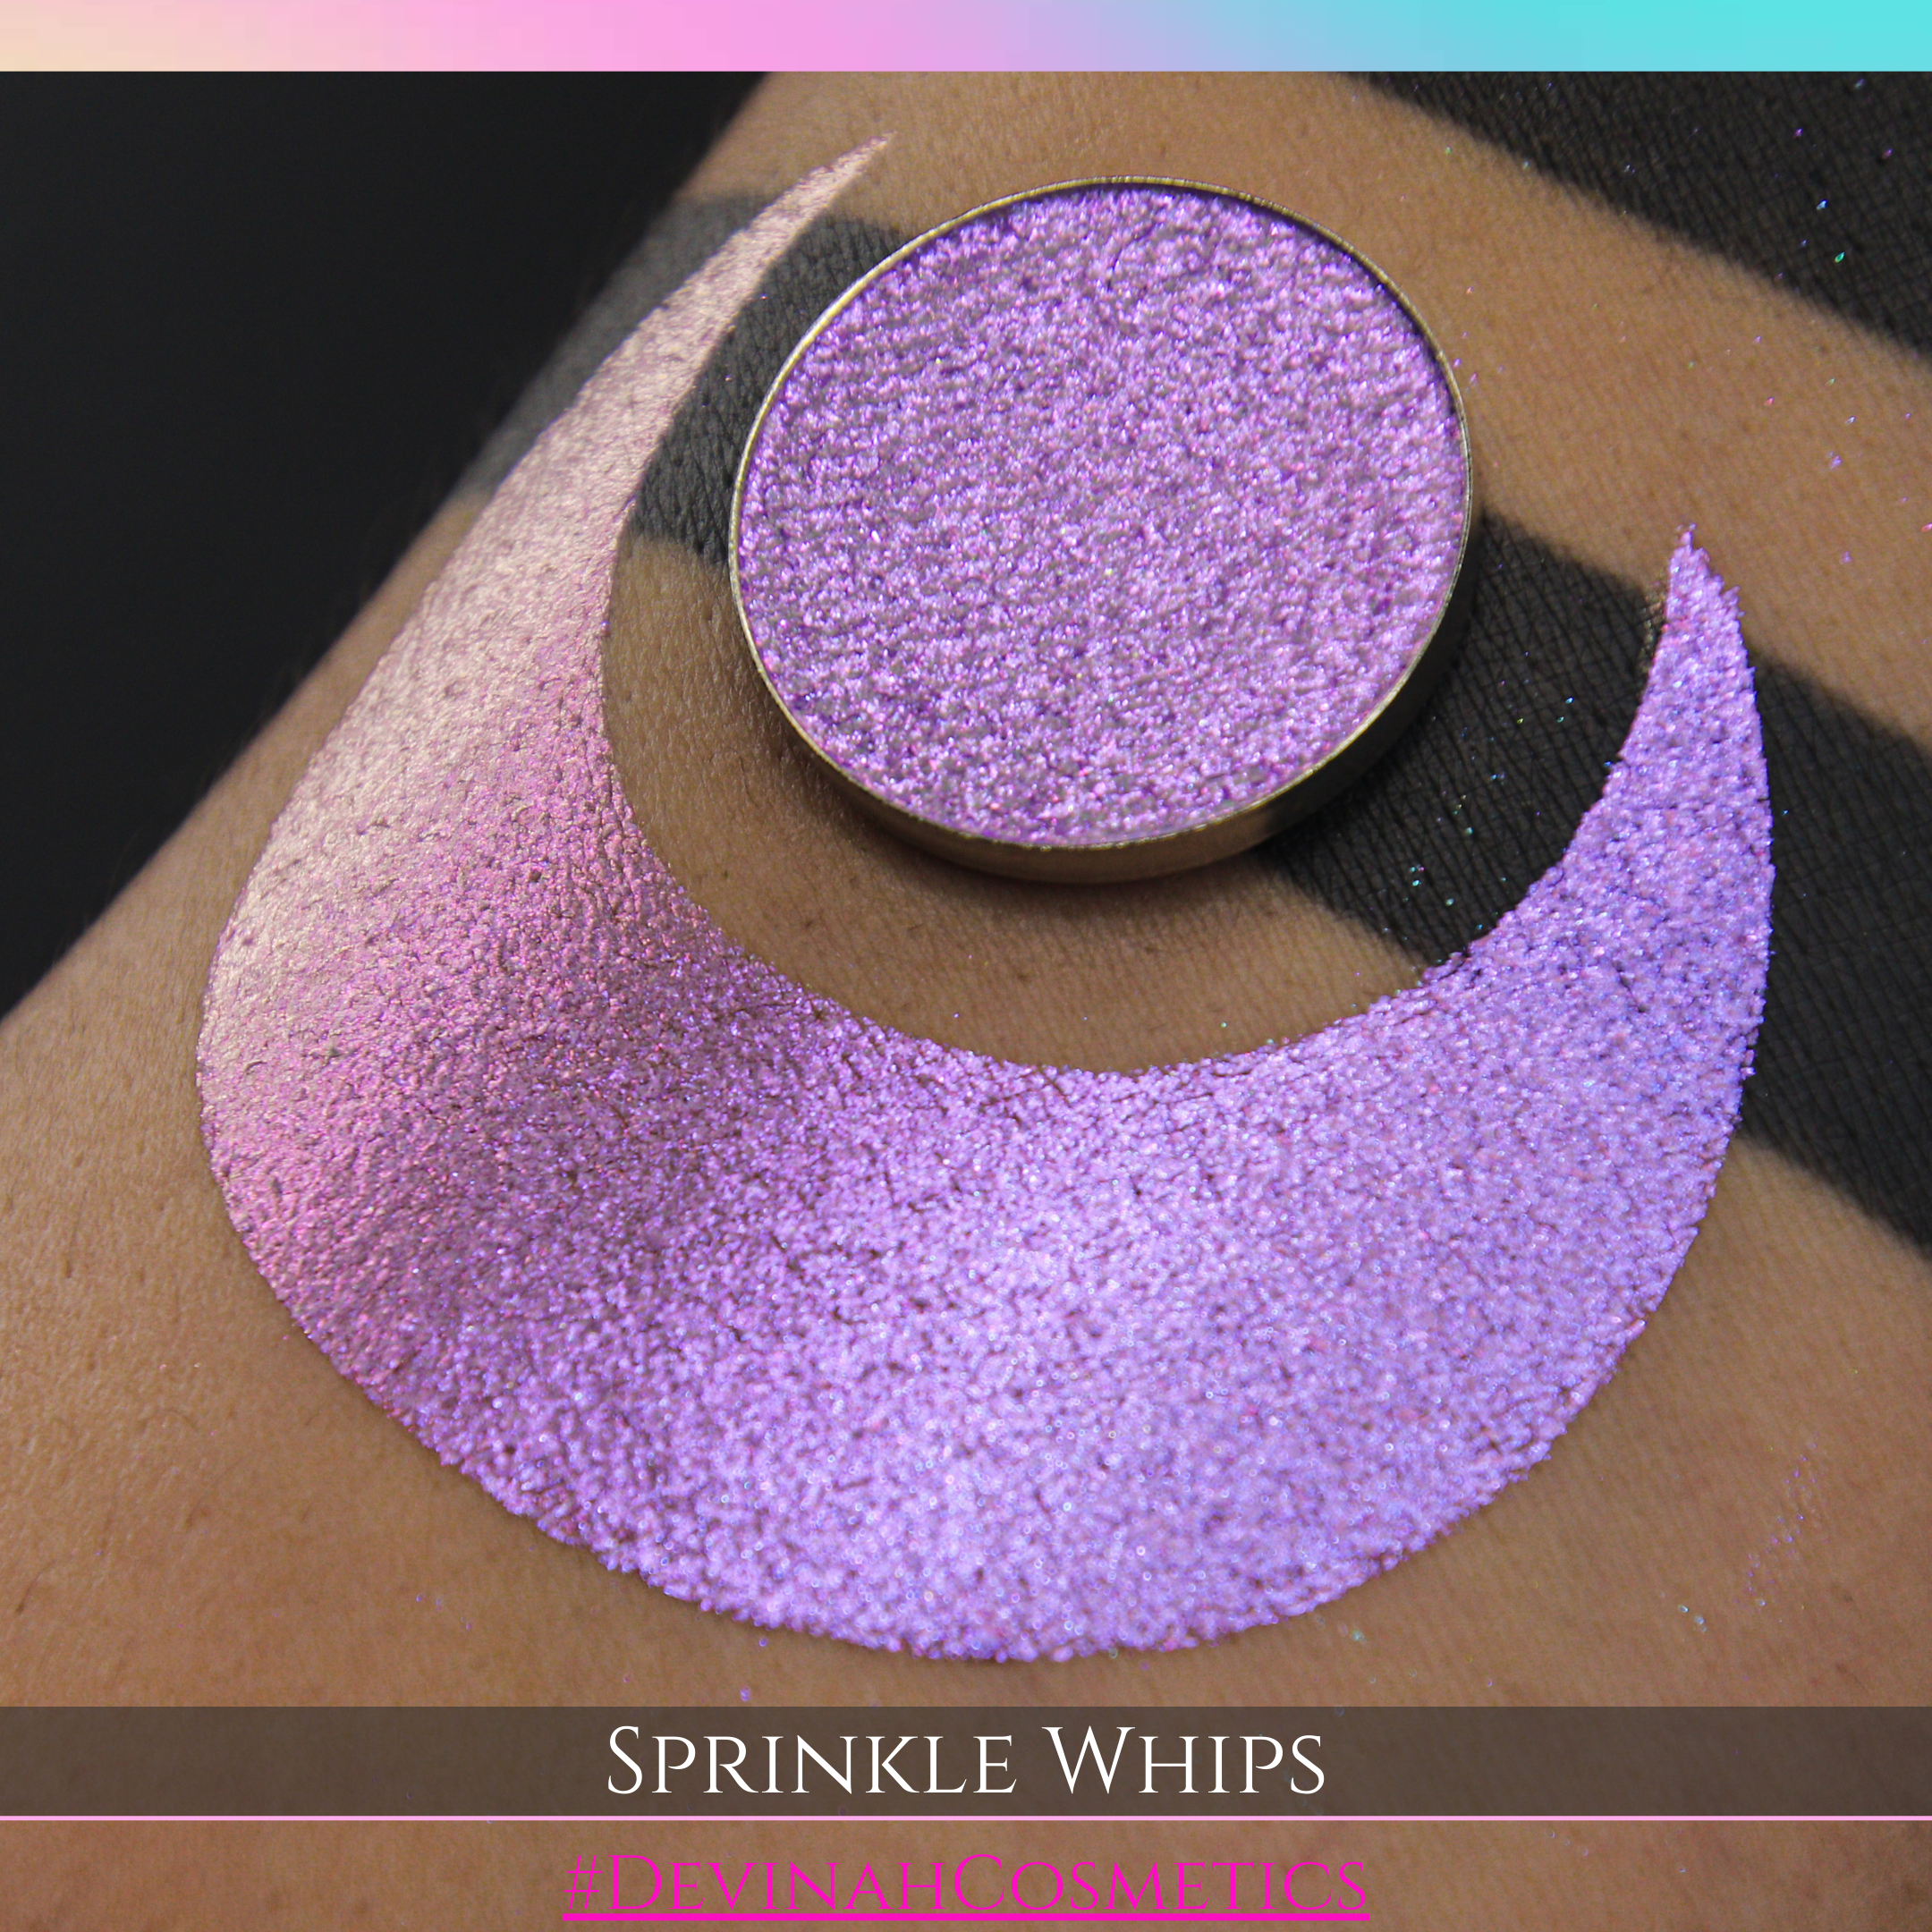 SPRINKLE WHIPS Pressed Pigment